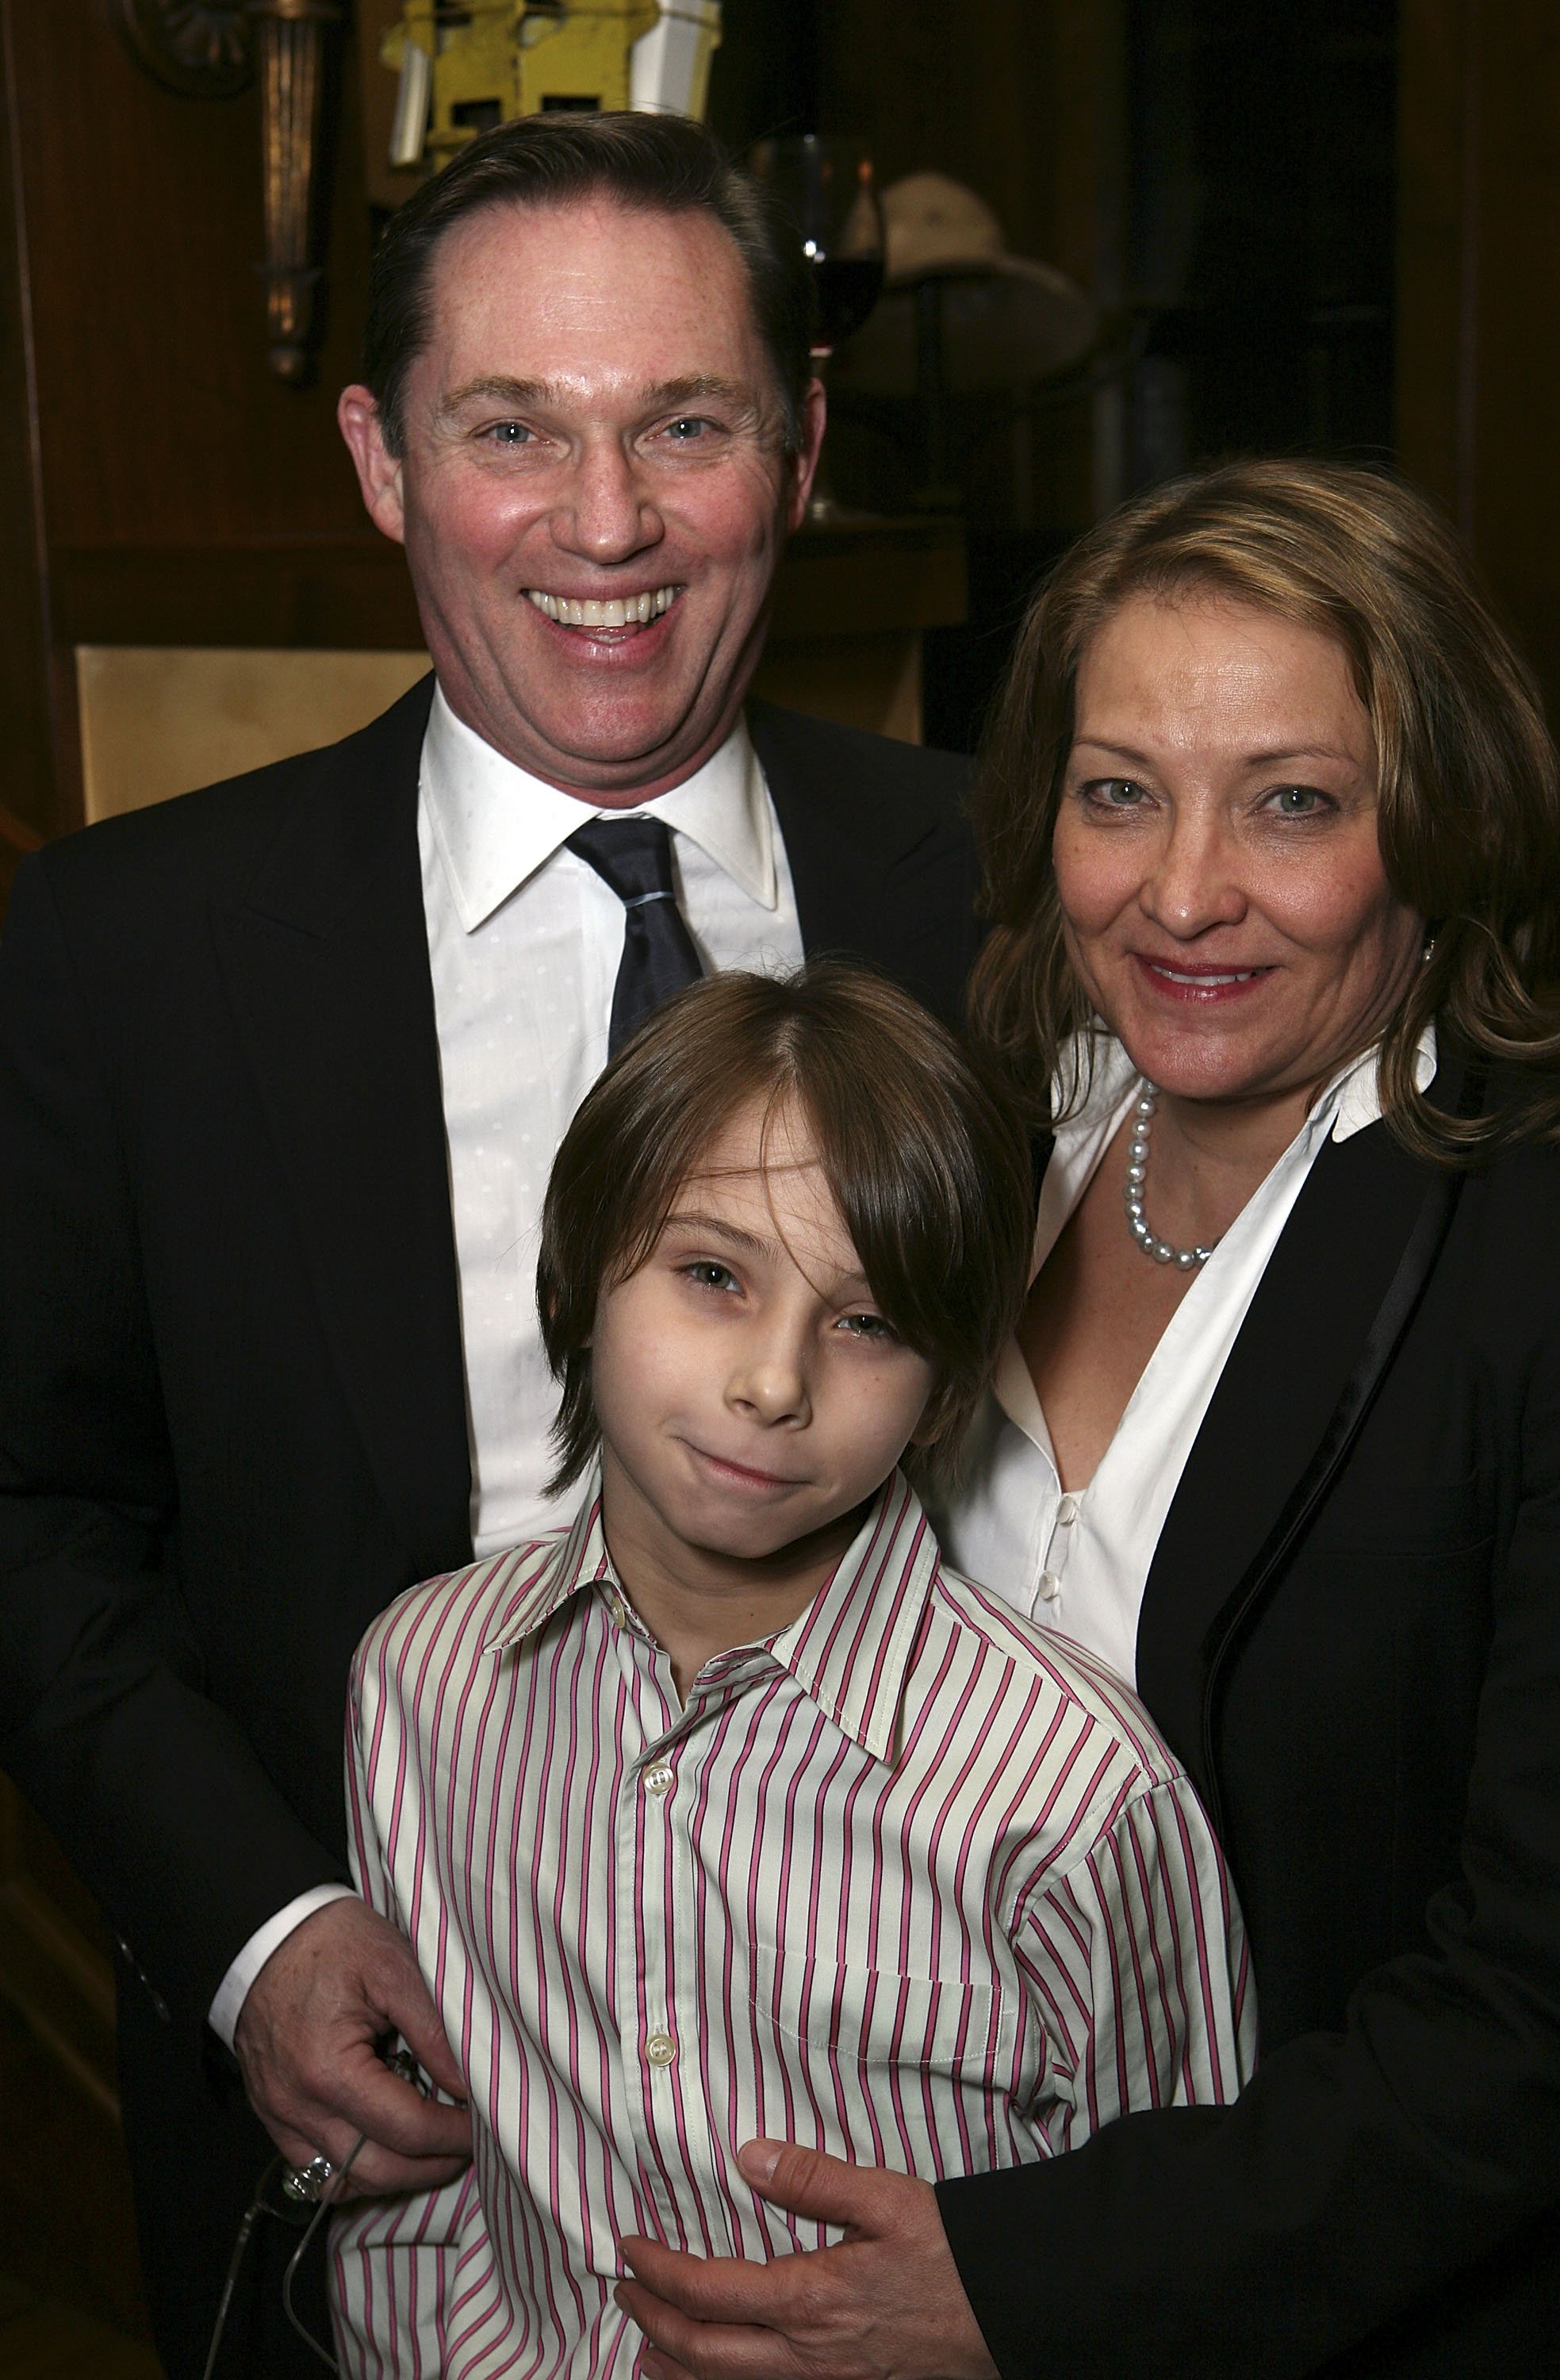 Actor Richard Thomas with son Montana and wife Georgiana pose during the party for the opening night performance of "Twelve Angry Men" at the CTG/Ahmanson Theatre, starring Richard Thomas and George Wendt, on March 29, 2007, in Los Angeles, California. | Source: Getty Images